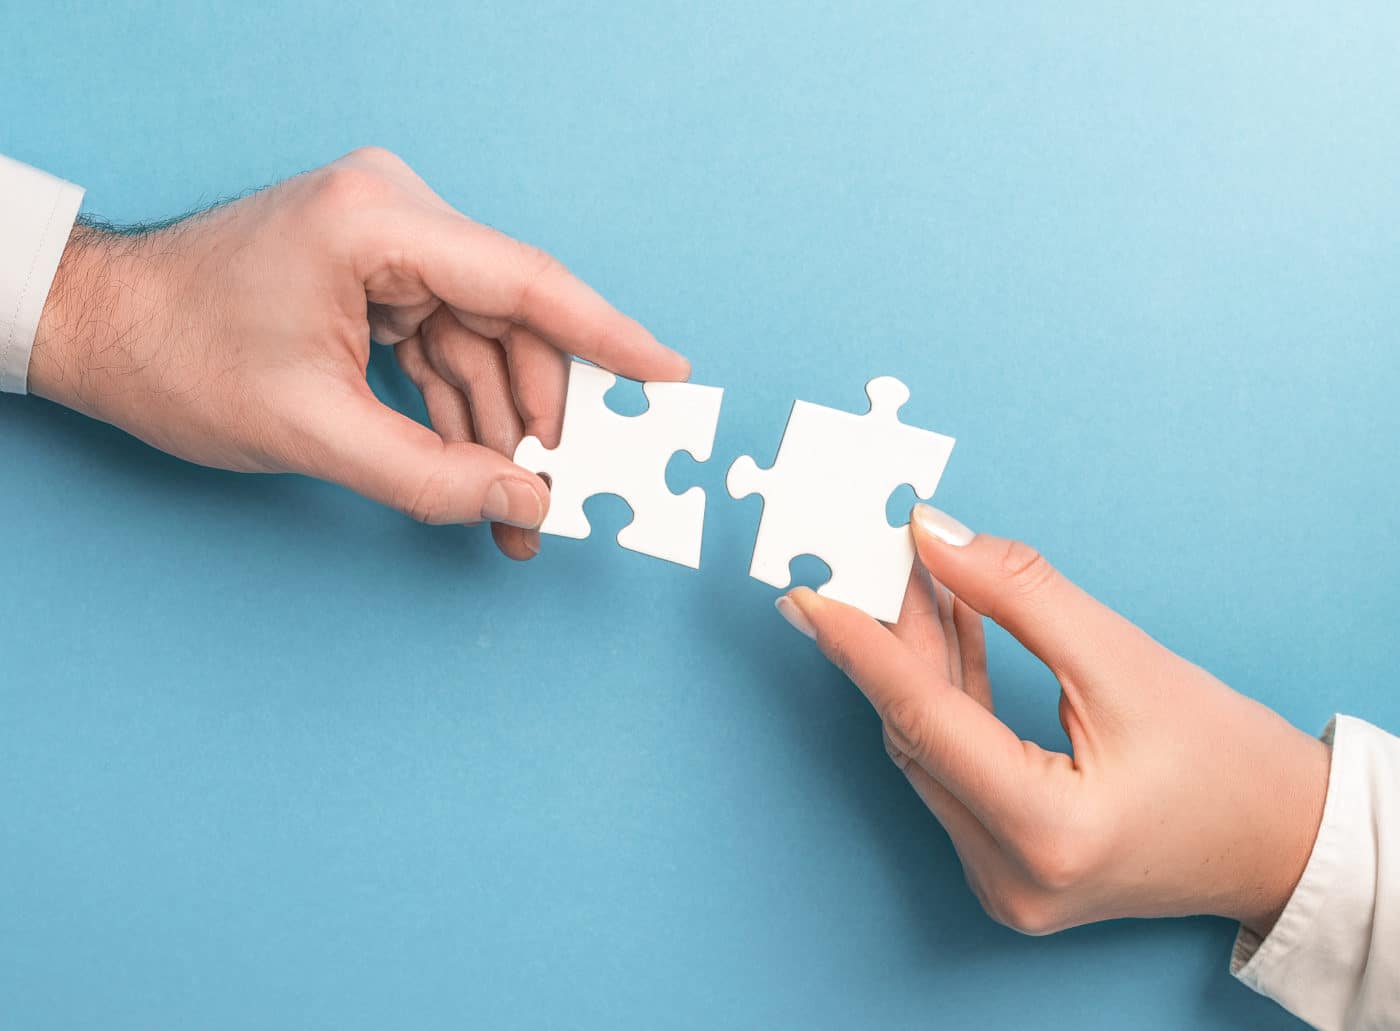 The man and woman holds in hand a jigsaw puzzle. Business solutions, success and strategy concept.